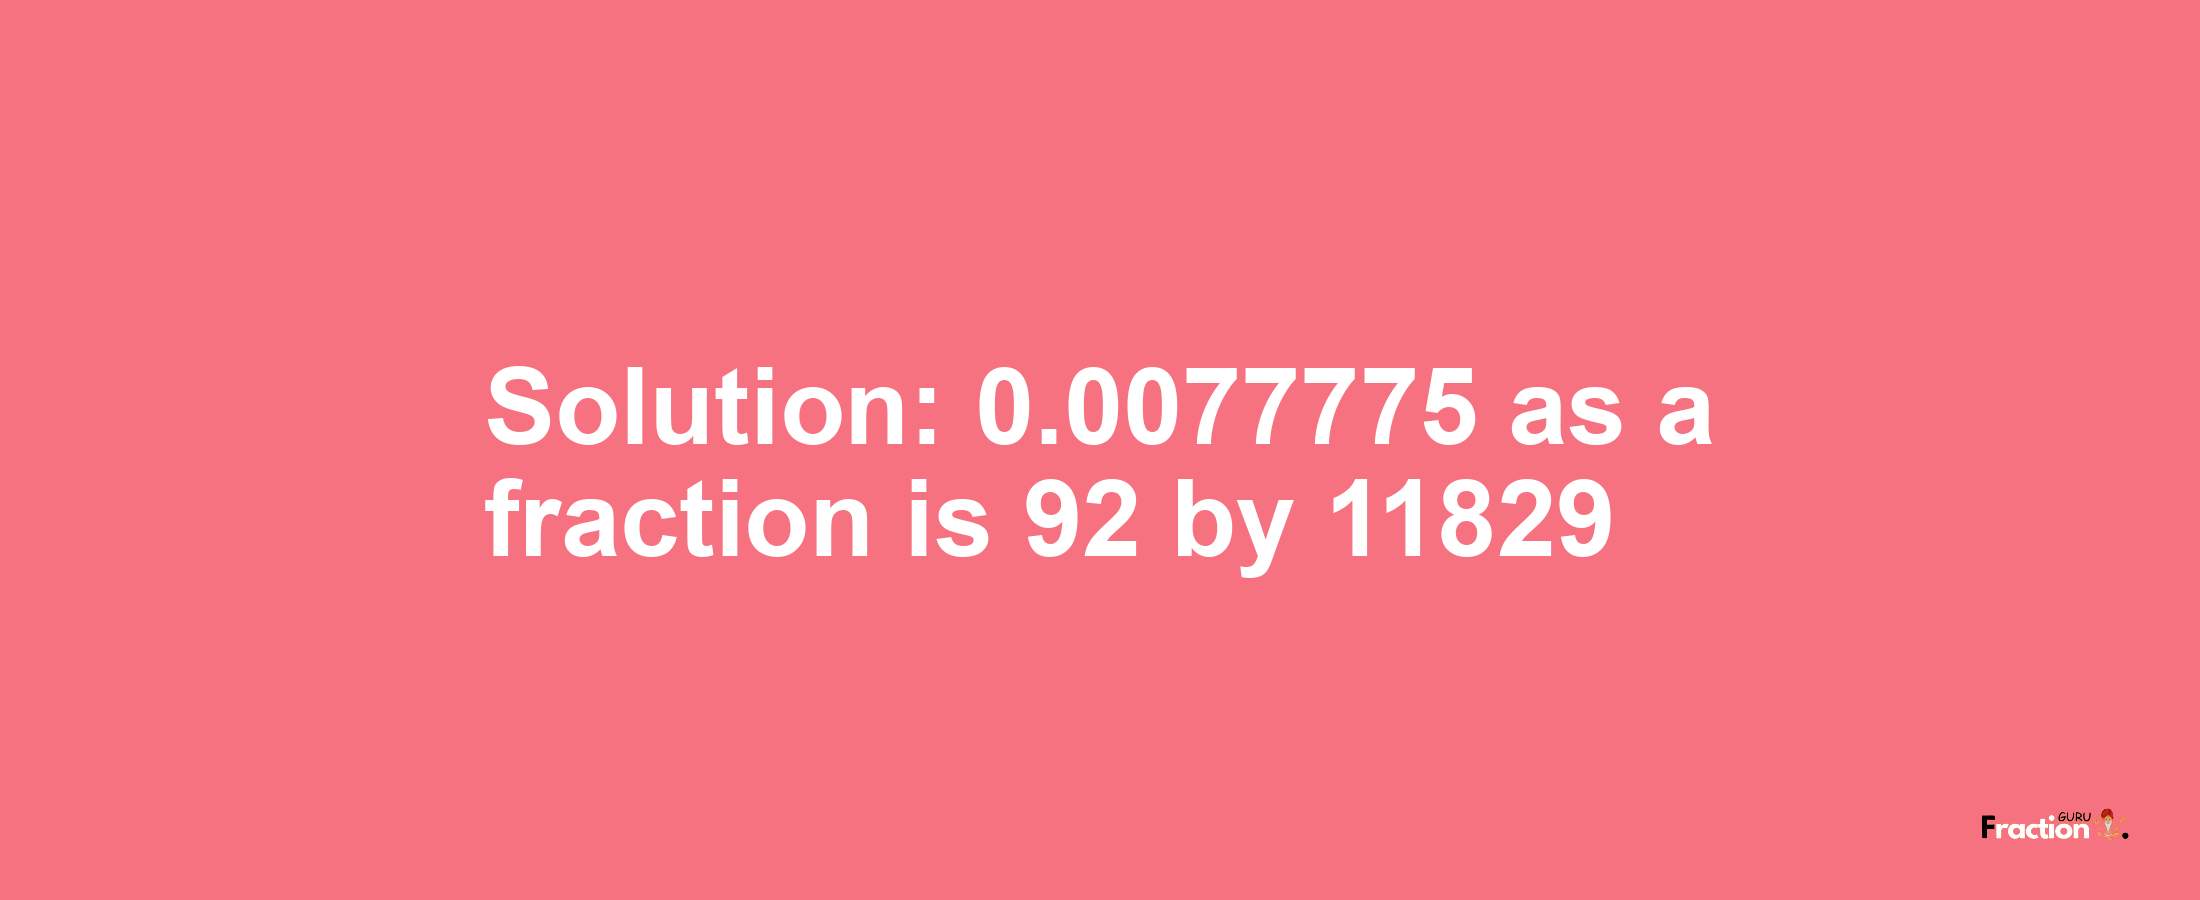 Solution:0.0077775 as a fraction is 92/11829